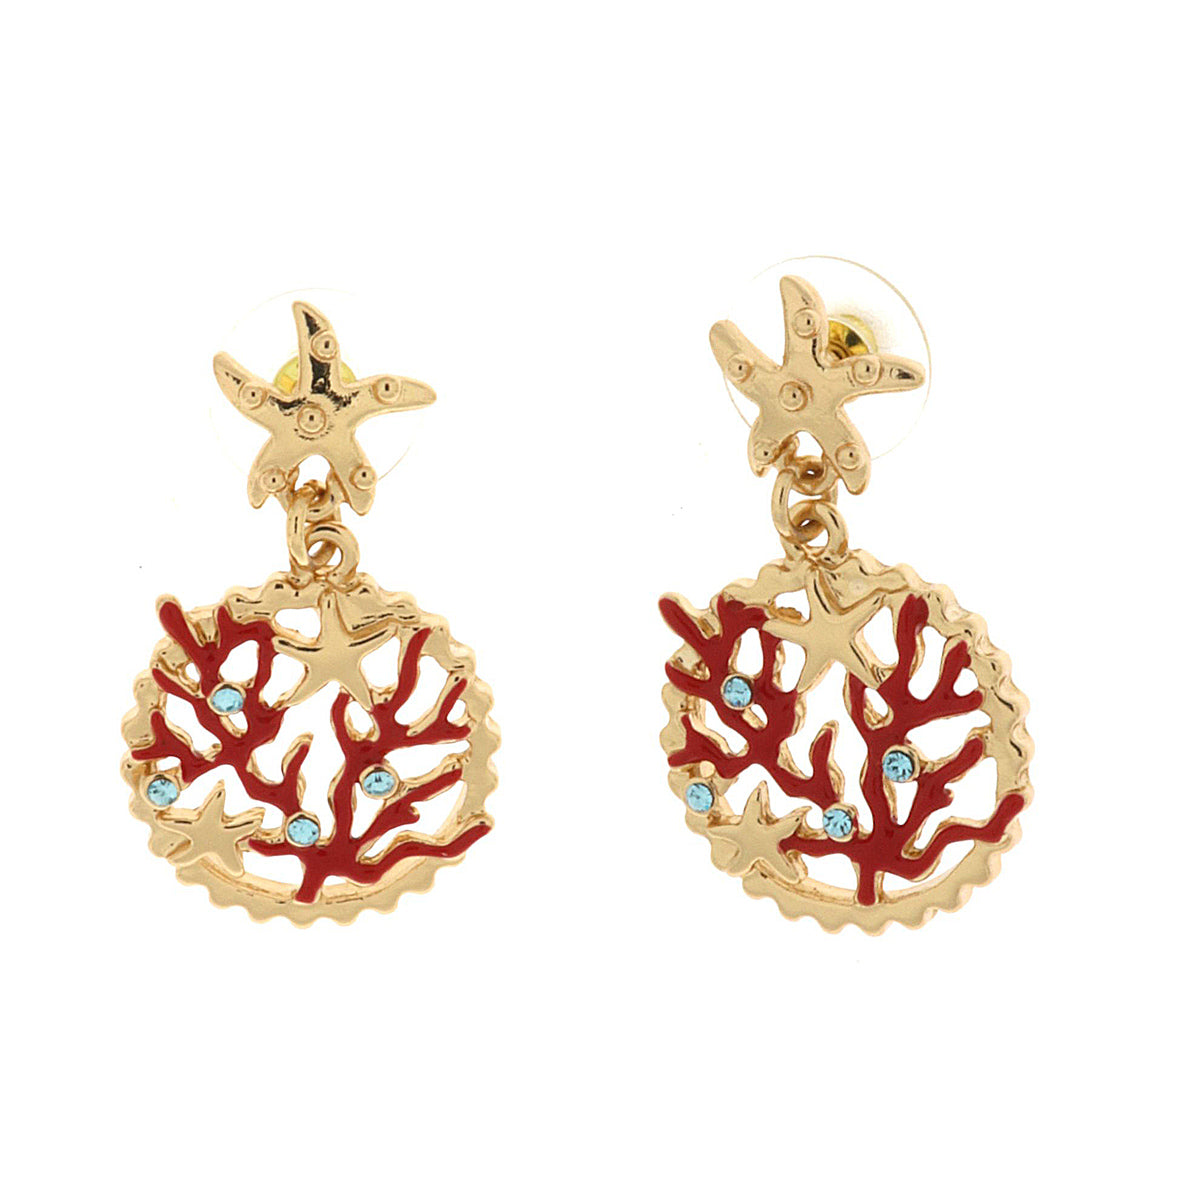 Metal earrings with corals